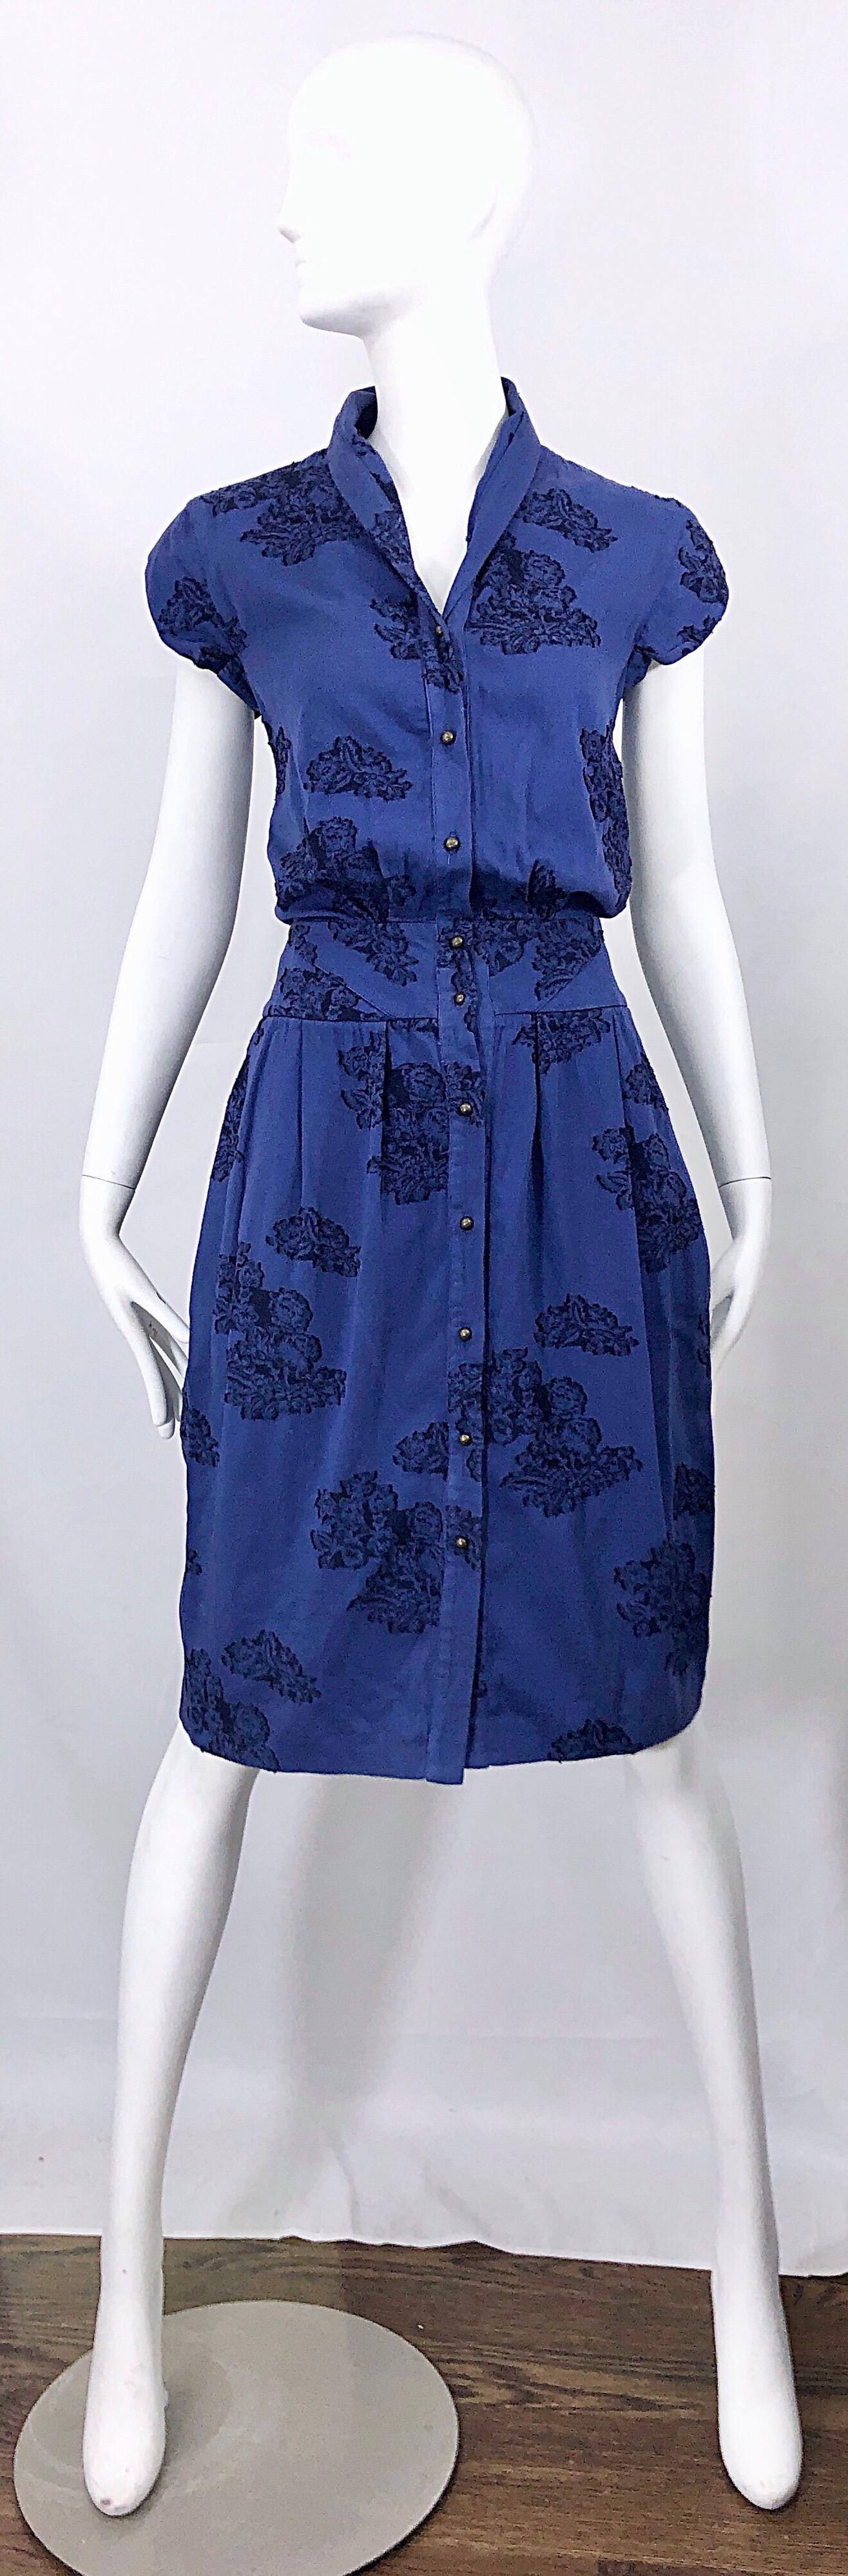 Chic ALEXANDER MCQUEEN royal blue and black lace print 50s style cotton bustle dress! Fitted bodice, with cap sleeves and a flattering skirt. POCKETS at each side of the hips. Nickel colored metal ball buttons up the front. Can easily be dressed up